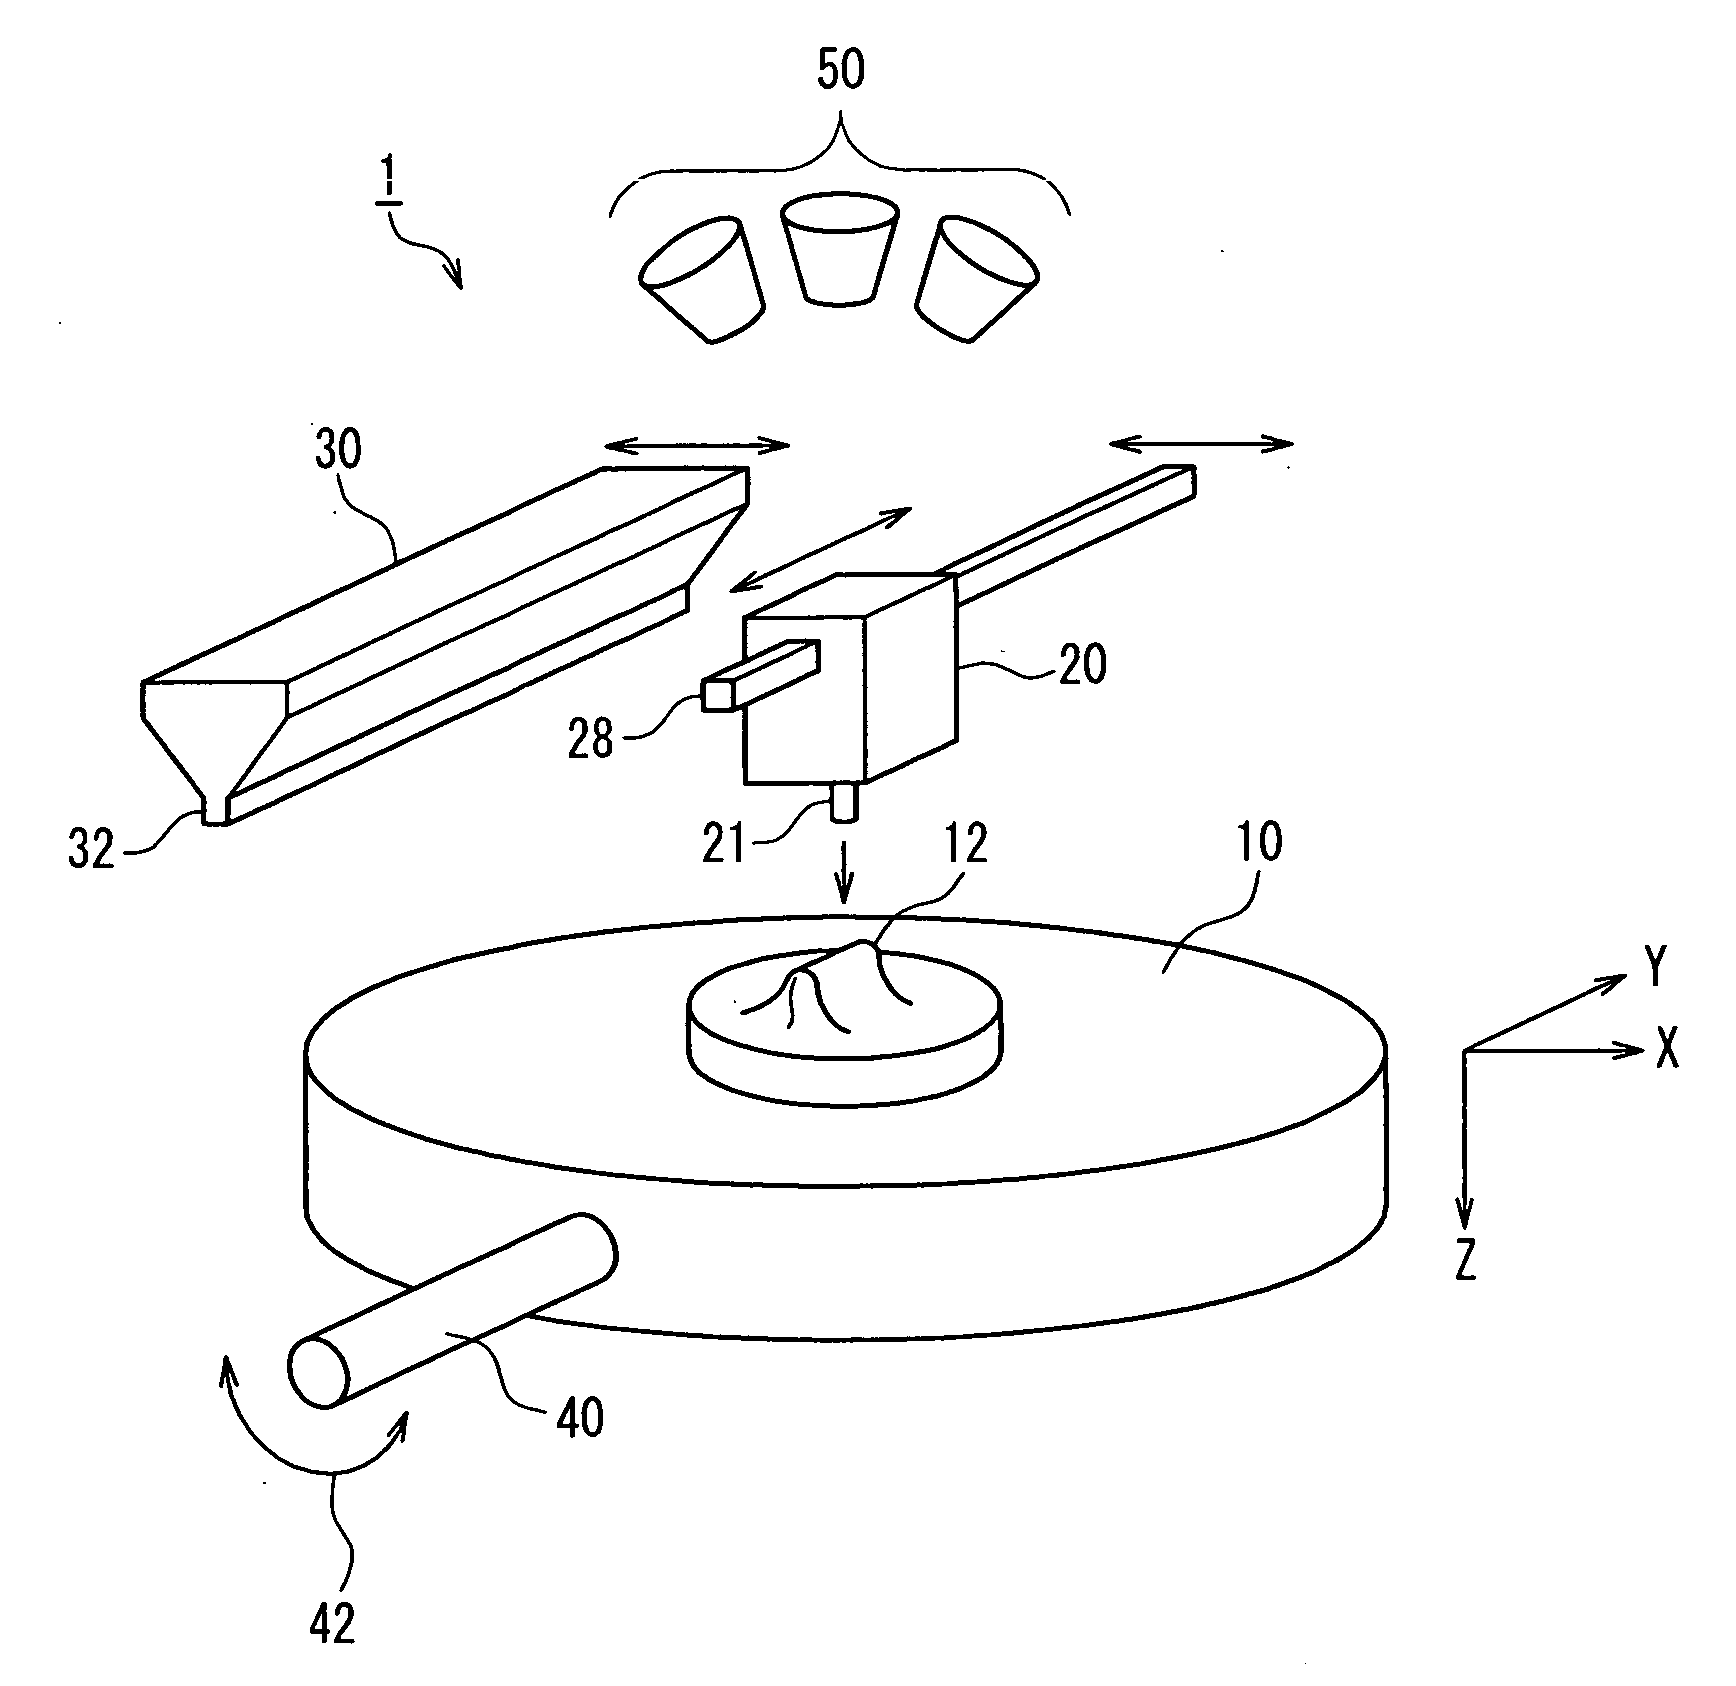 Apparatus for Forming Layered Object